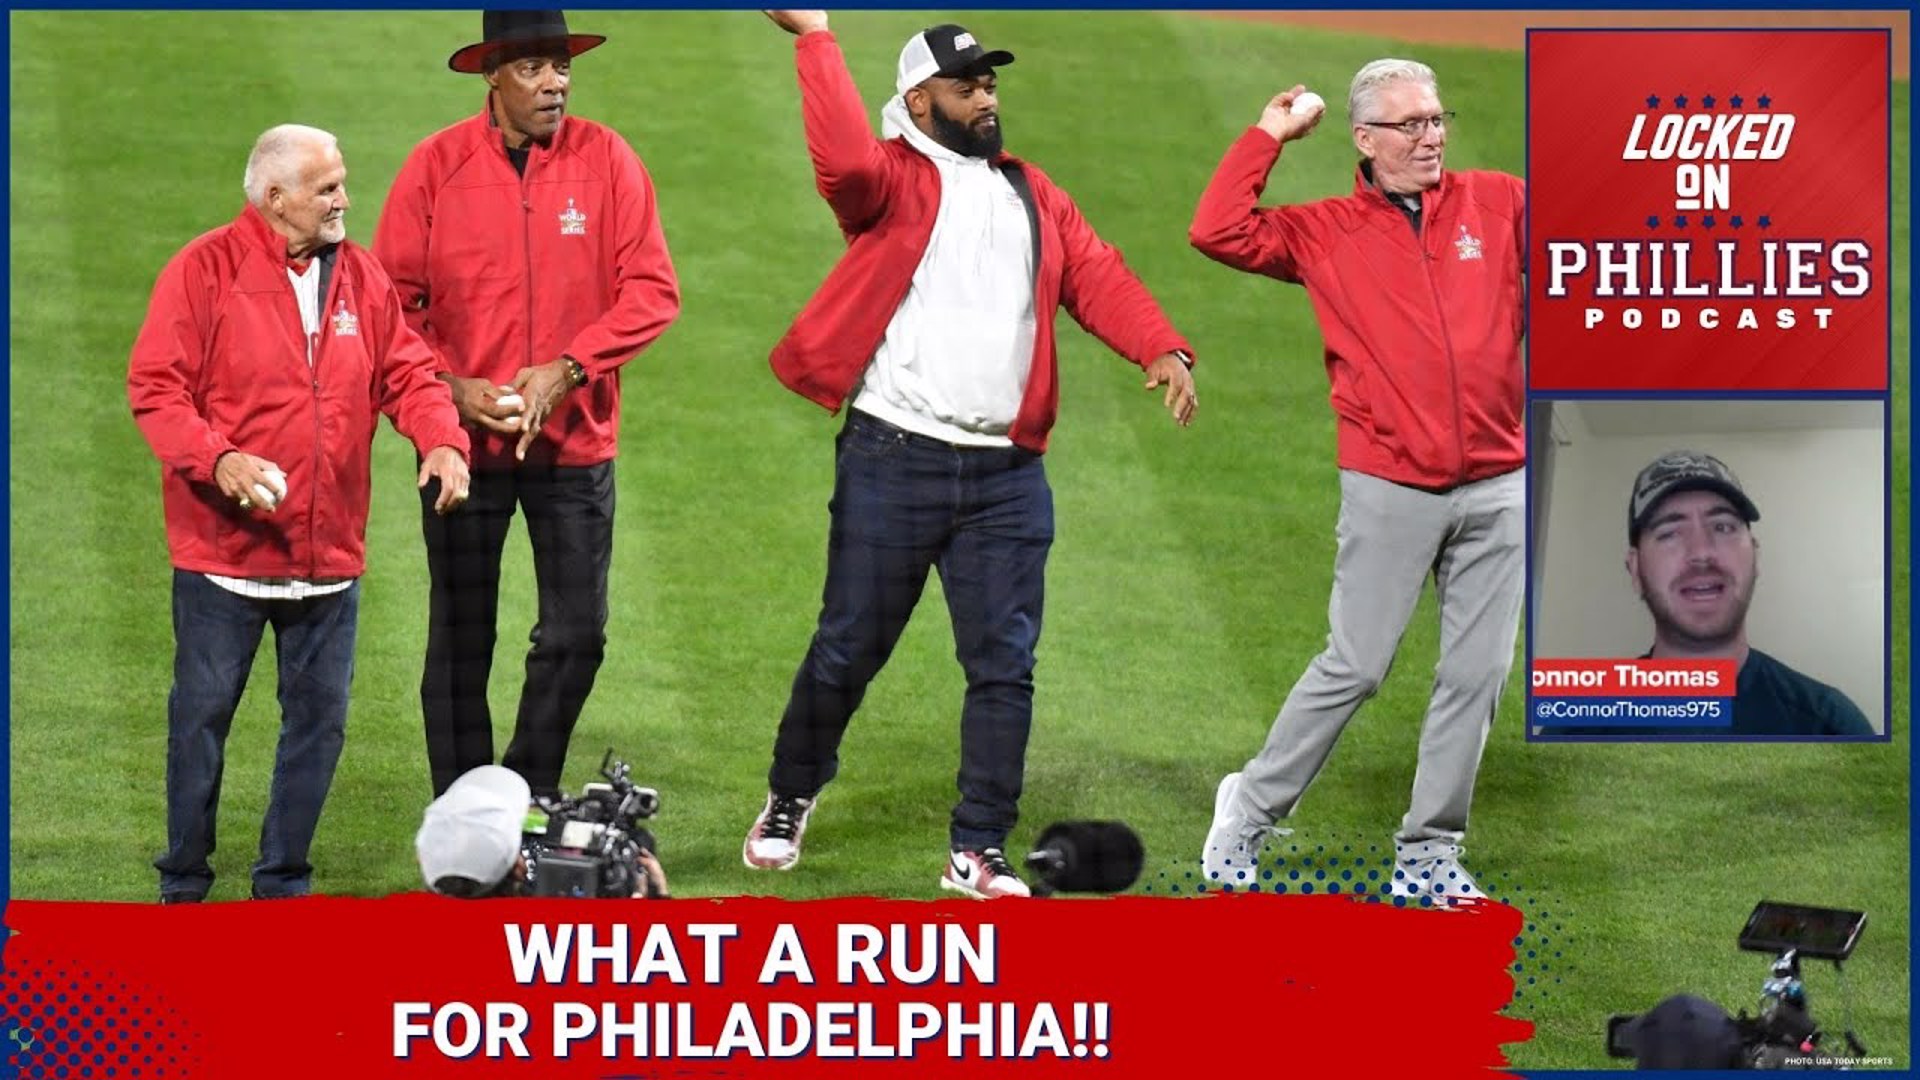 In today's very special episode, Connor discusses the absolutely incredible run the Philadelphia sports scene has been on right now.